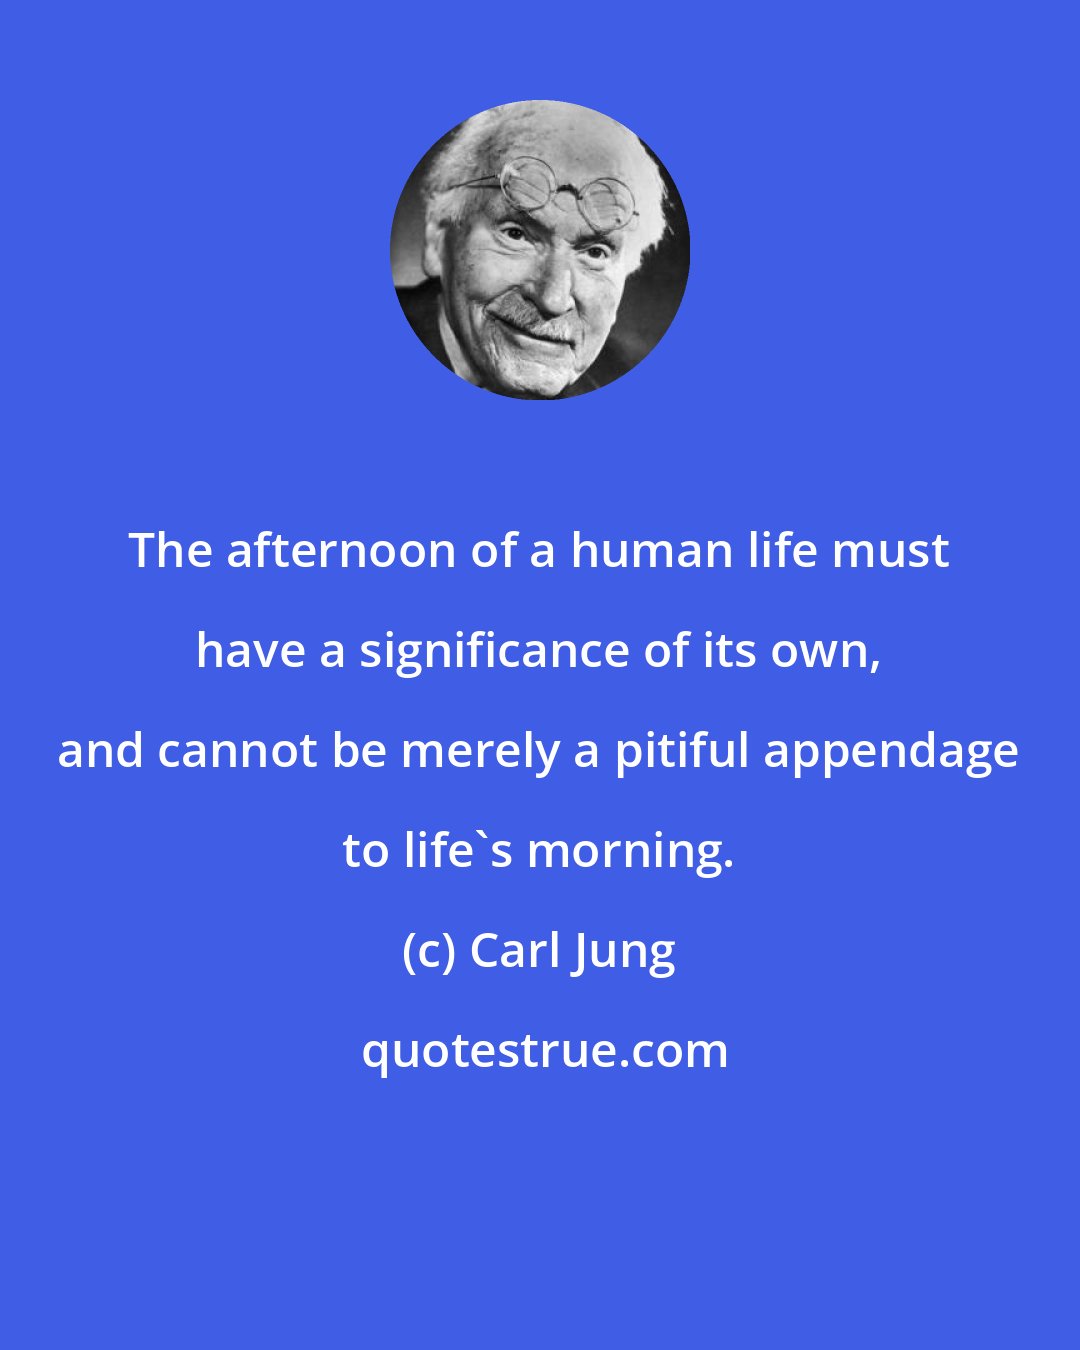 Carl Jung: The afternoon of a human life must have a significance of its own, and cannot be merely a pitiful appendage to life's morning.